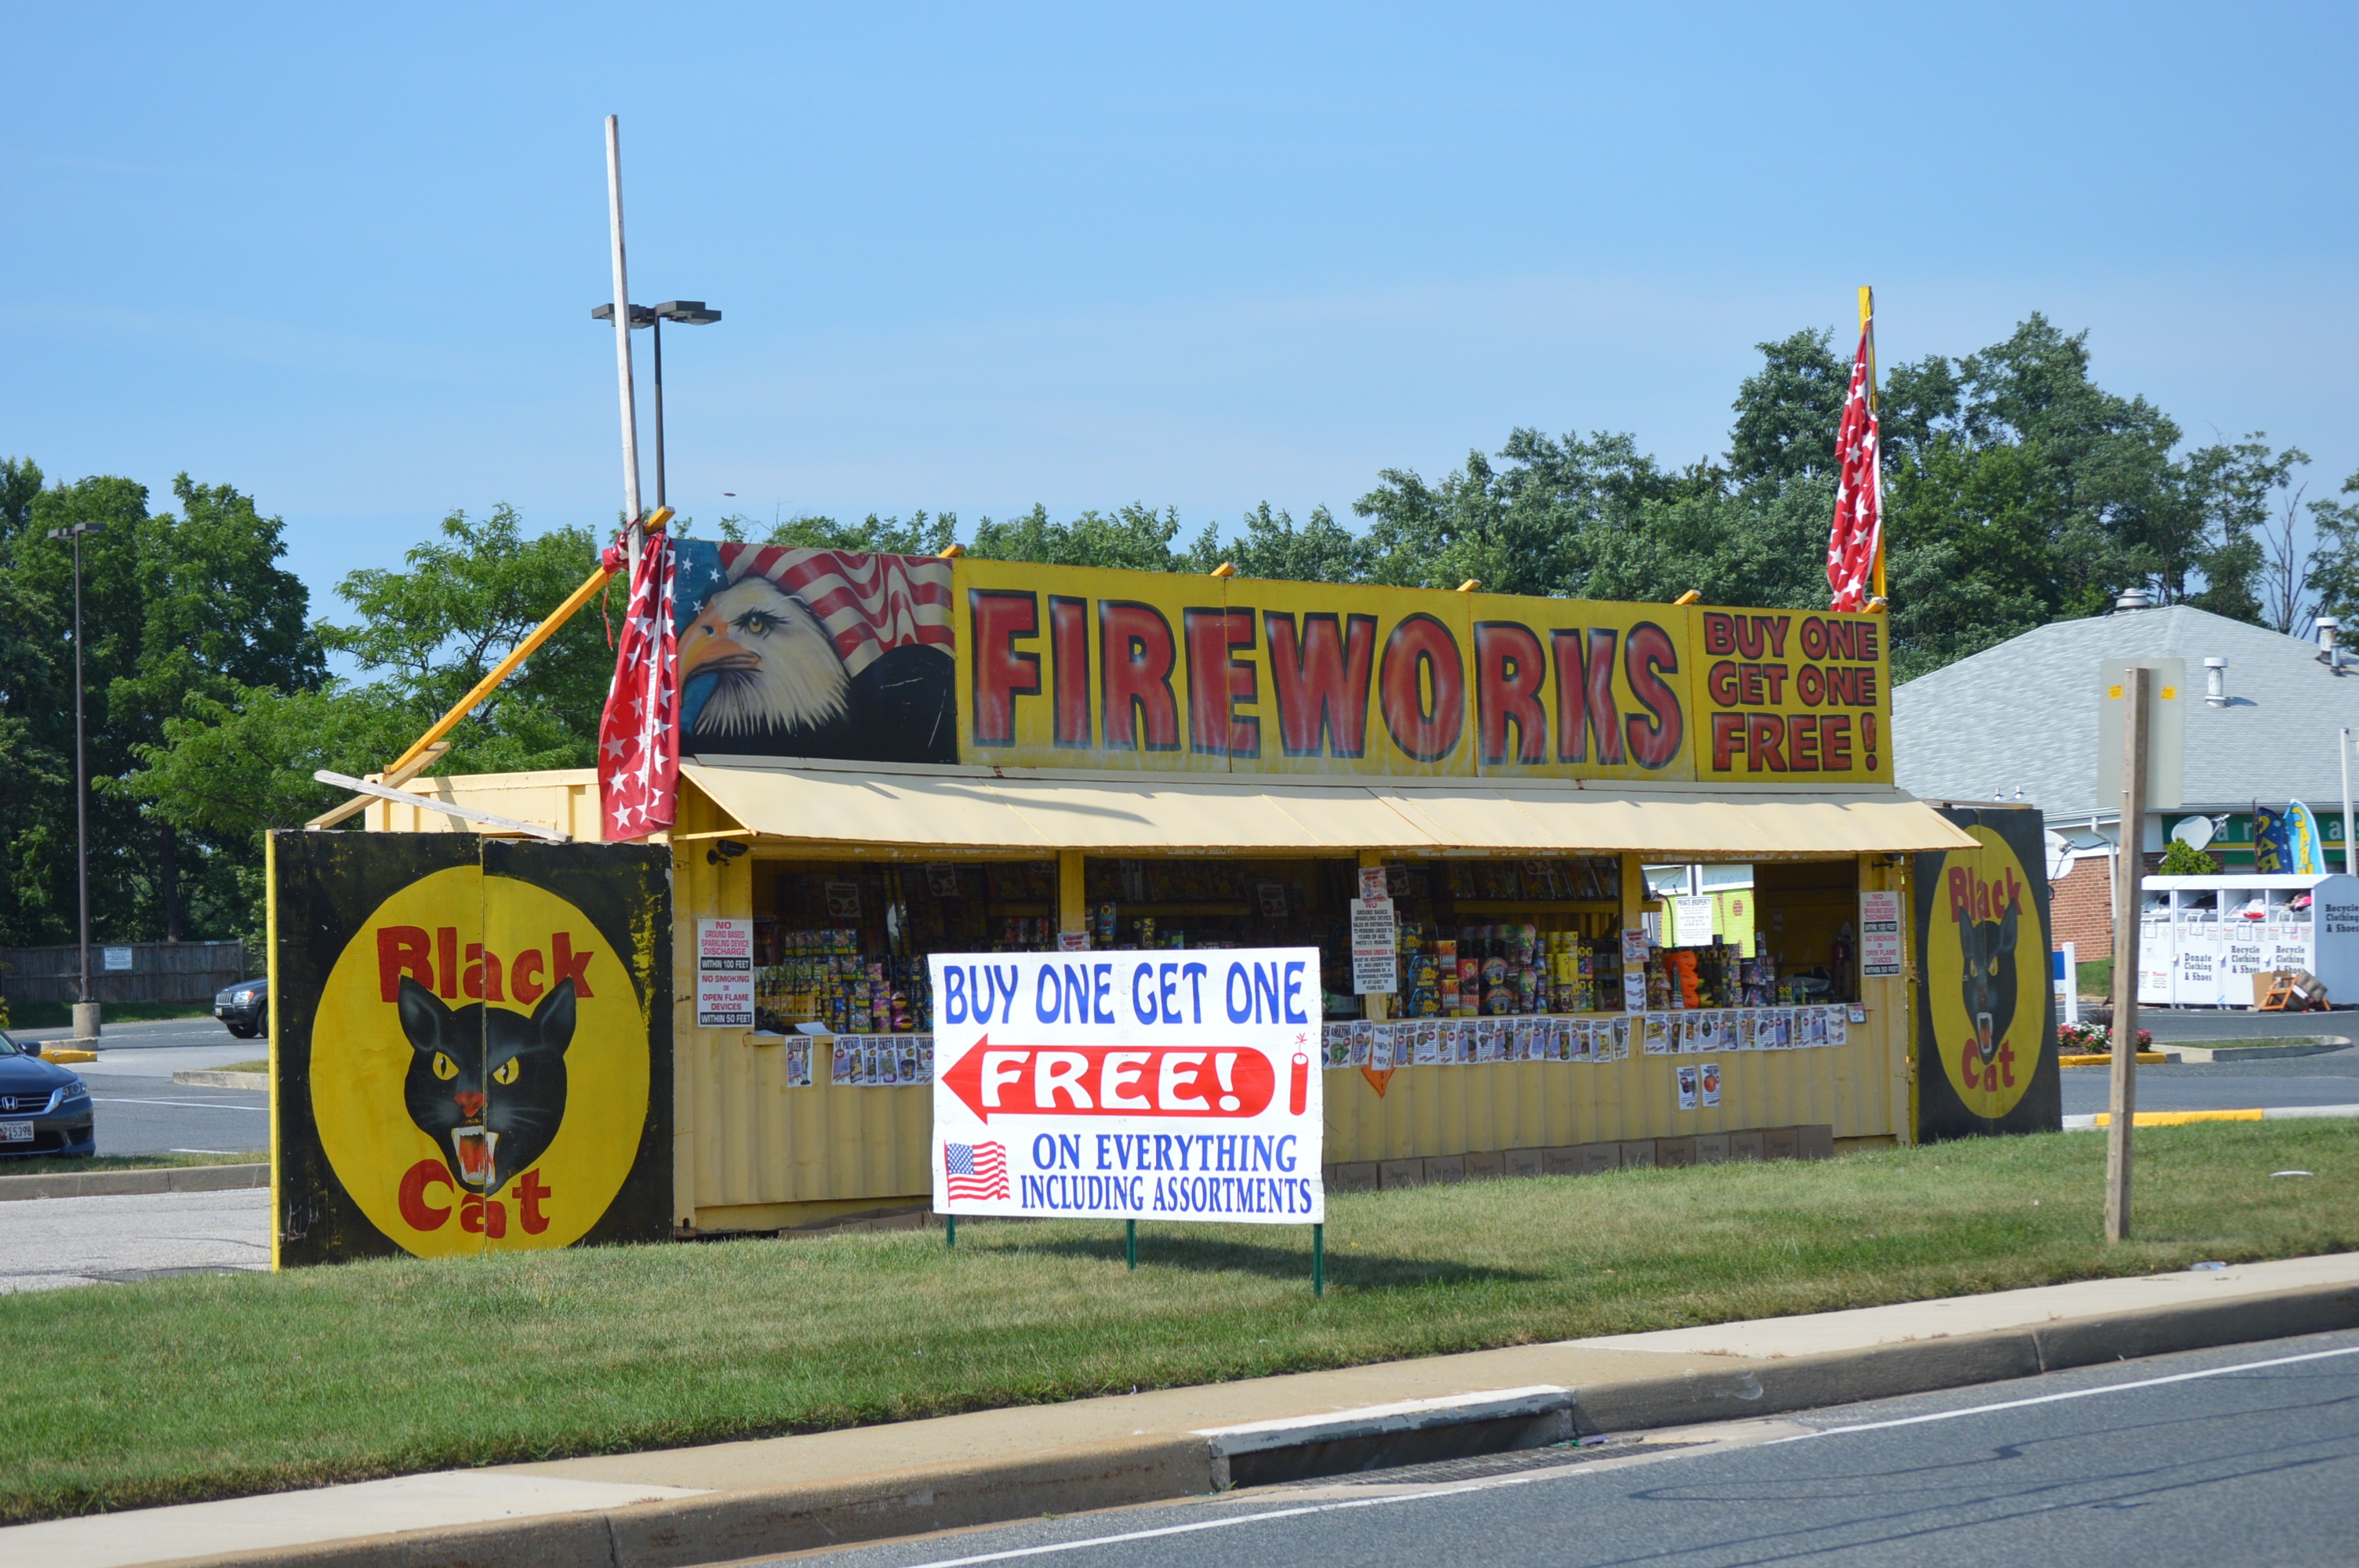 A 4th of July firewoprks stand on Baltimore National Pike in Baltimore, maryland. (credit Anthony C. Hayes)